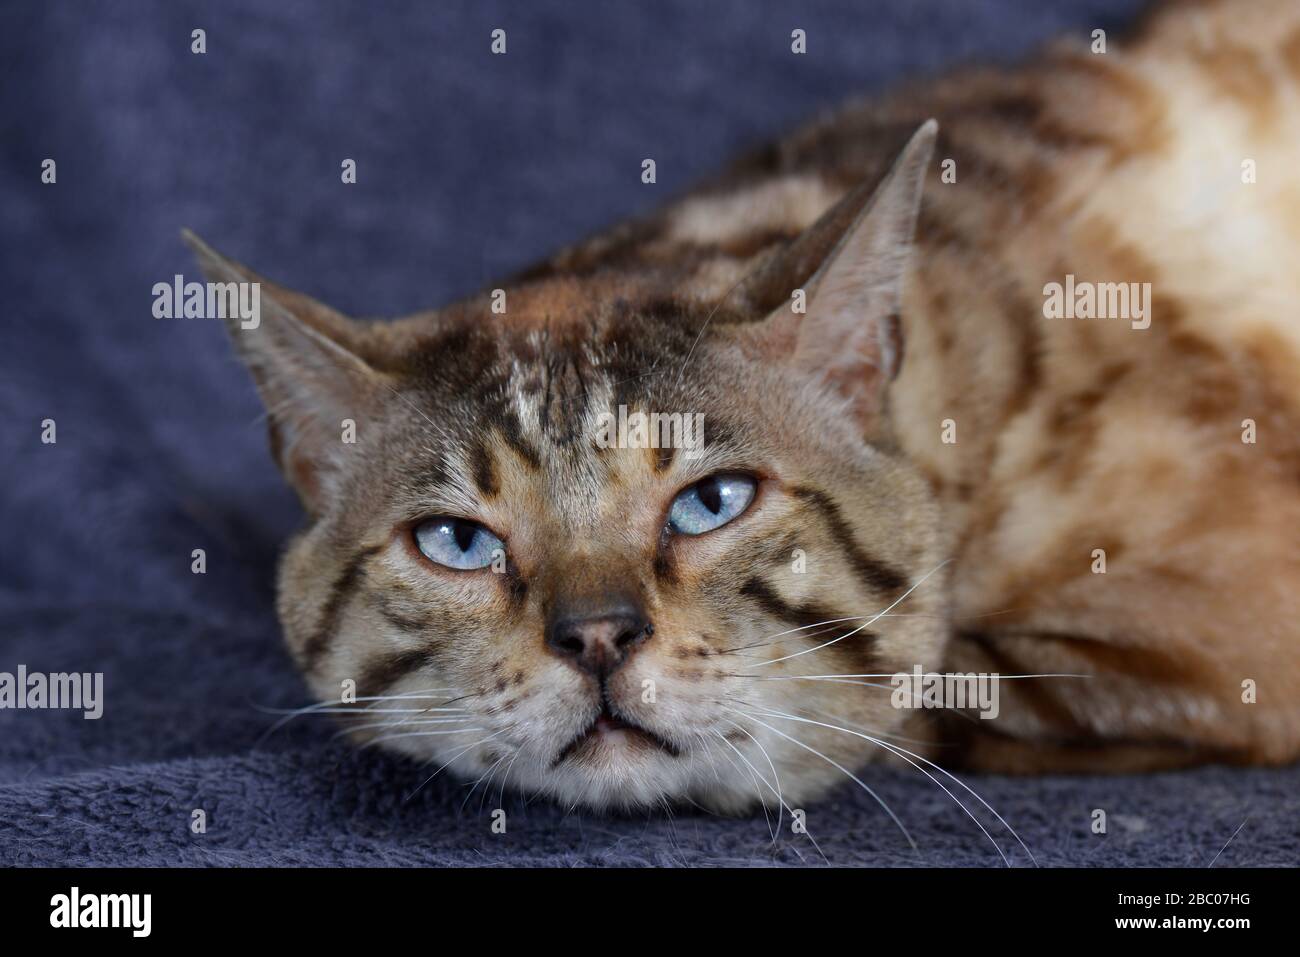 Close up of a tabby cat resting on the blue background. Horizontal, front view, portrait. Stock Photo